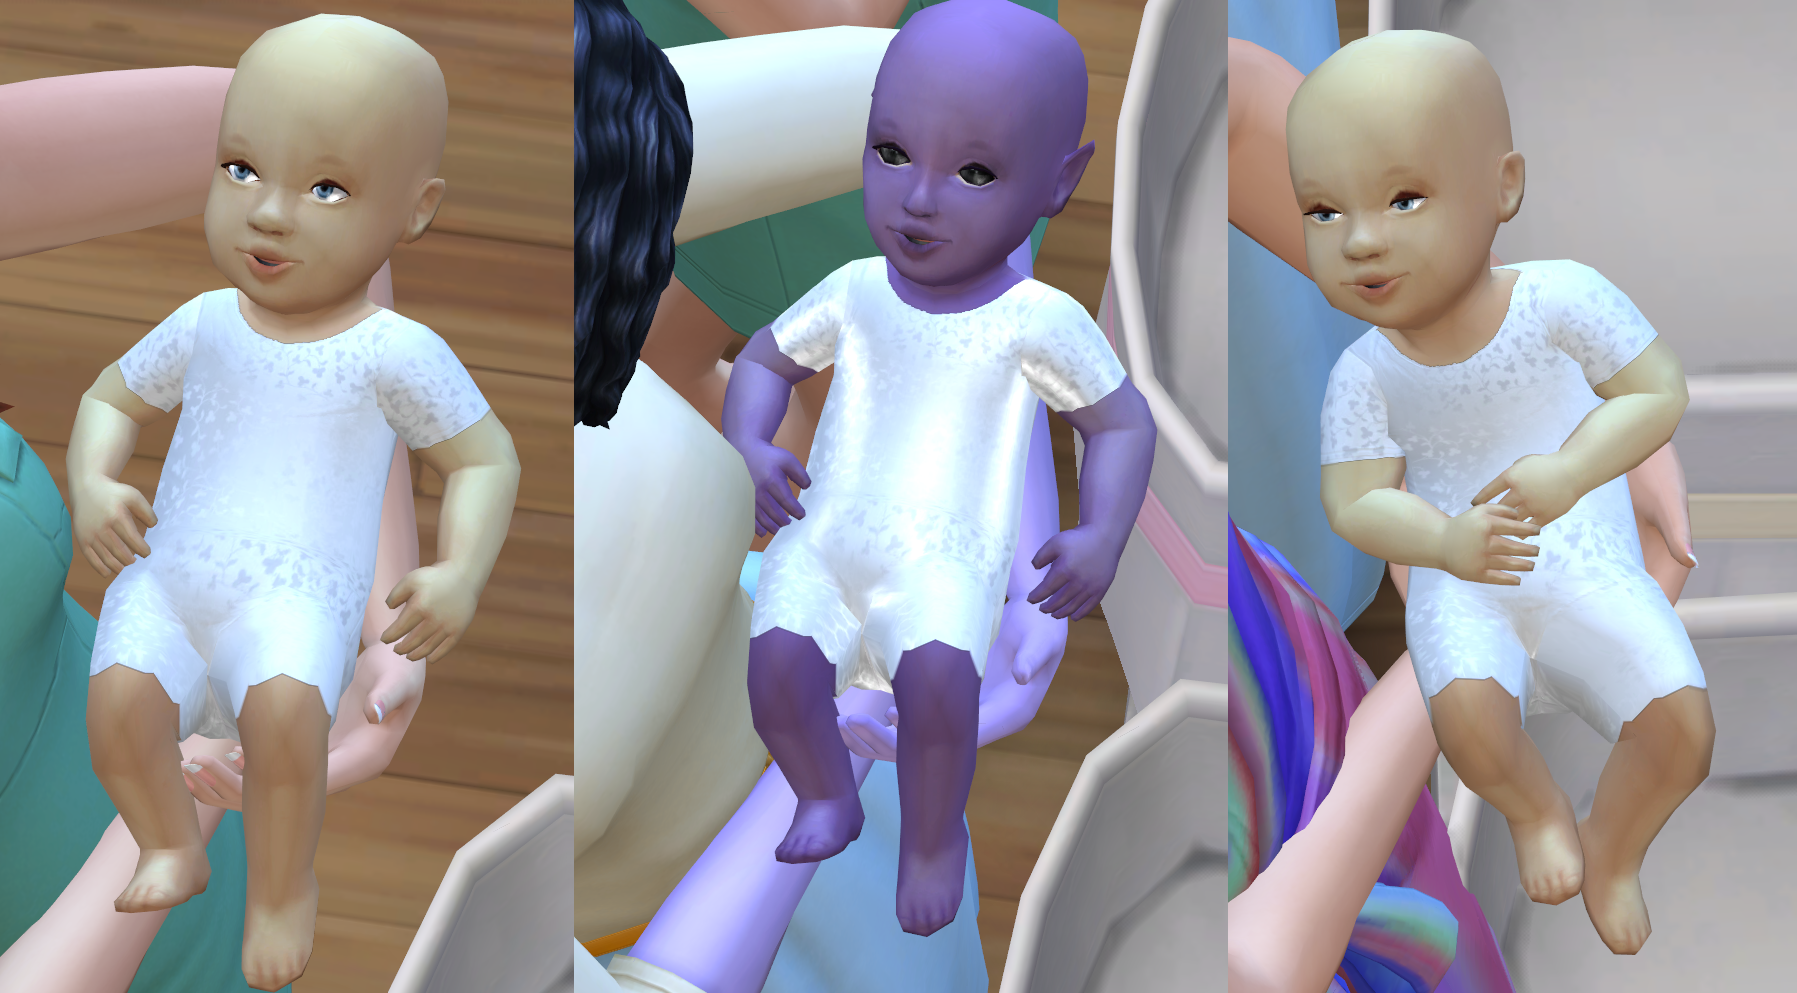 Satin summer baby outfit - The Sims 4 Mods - CurseForge